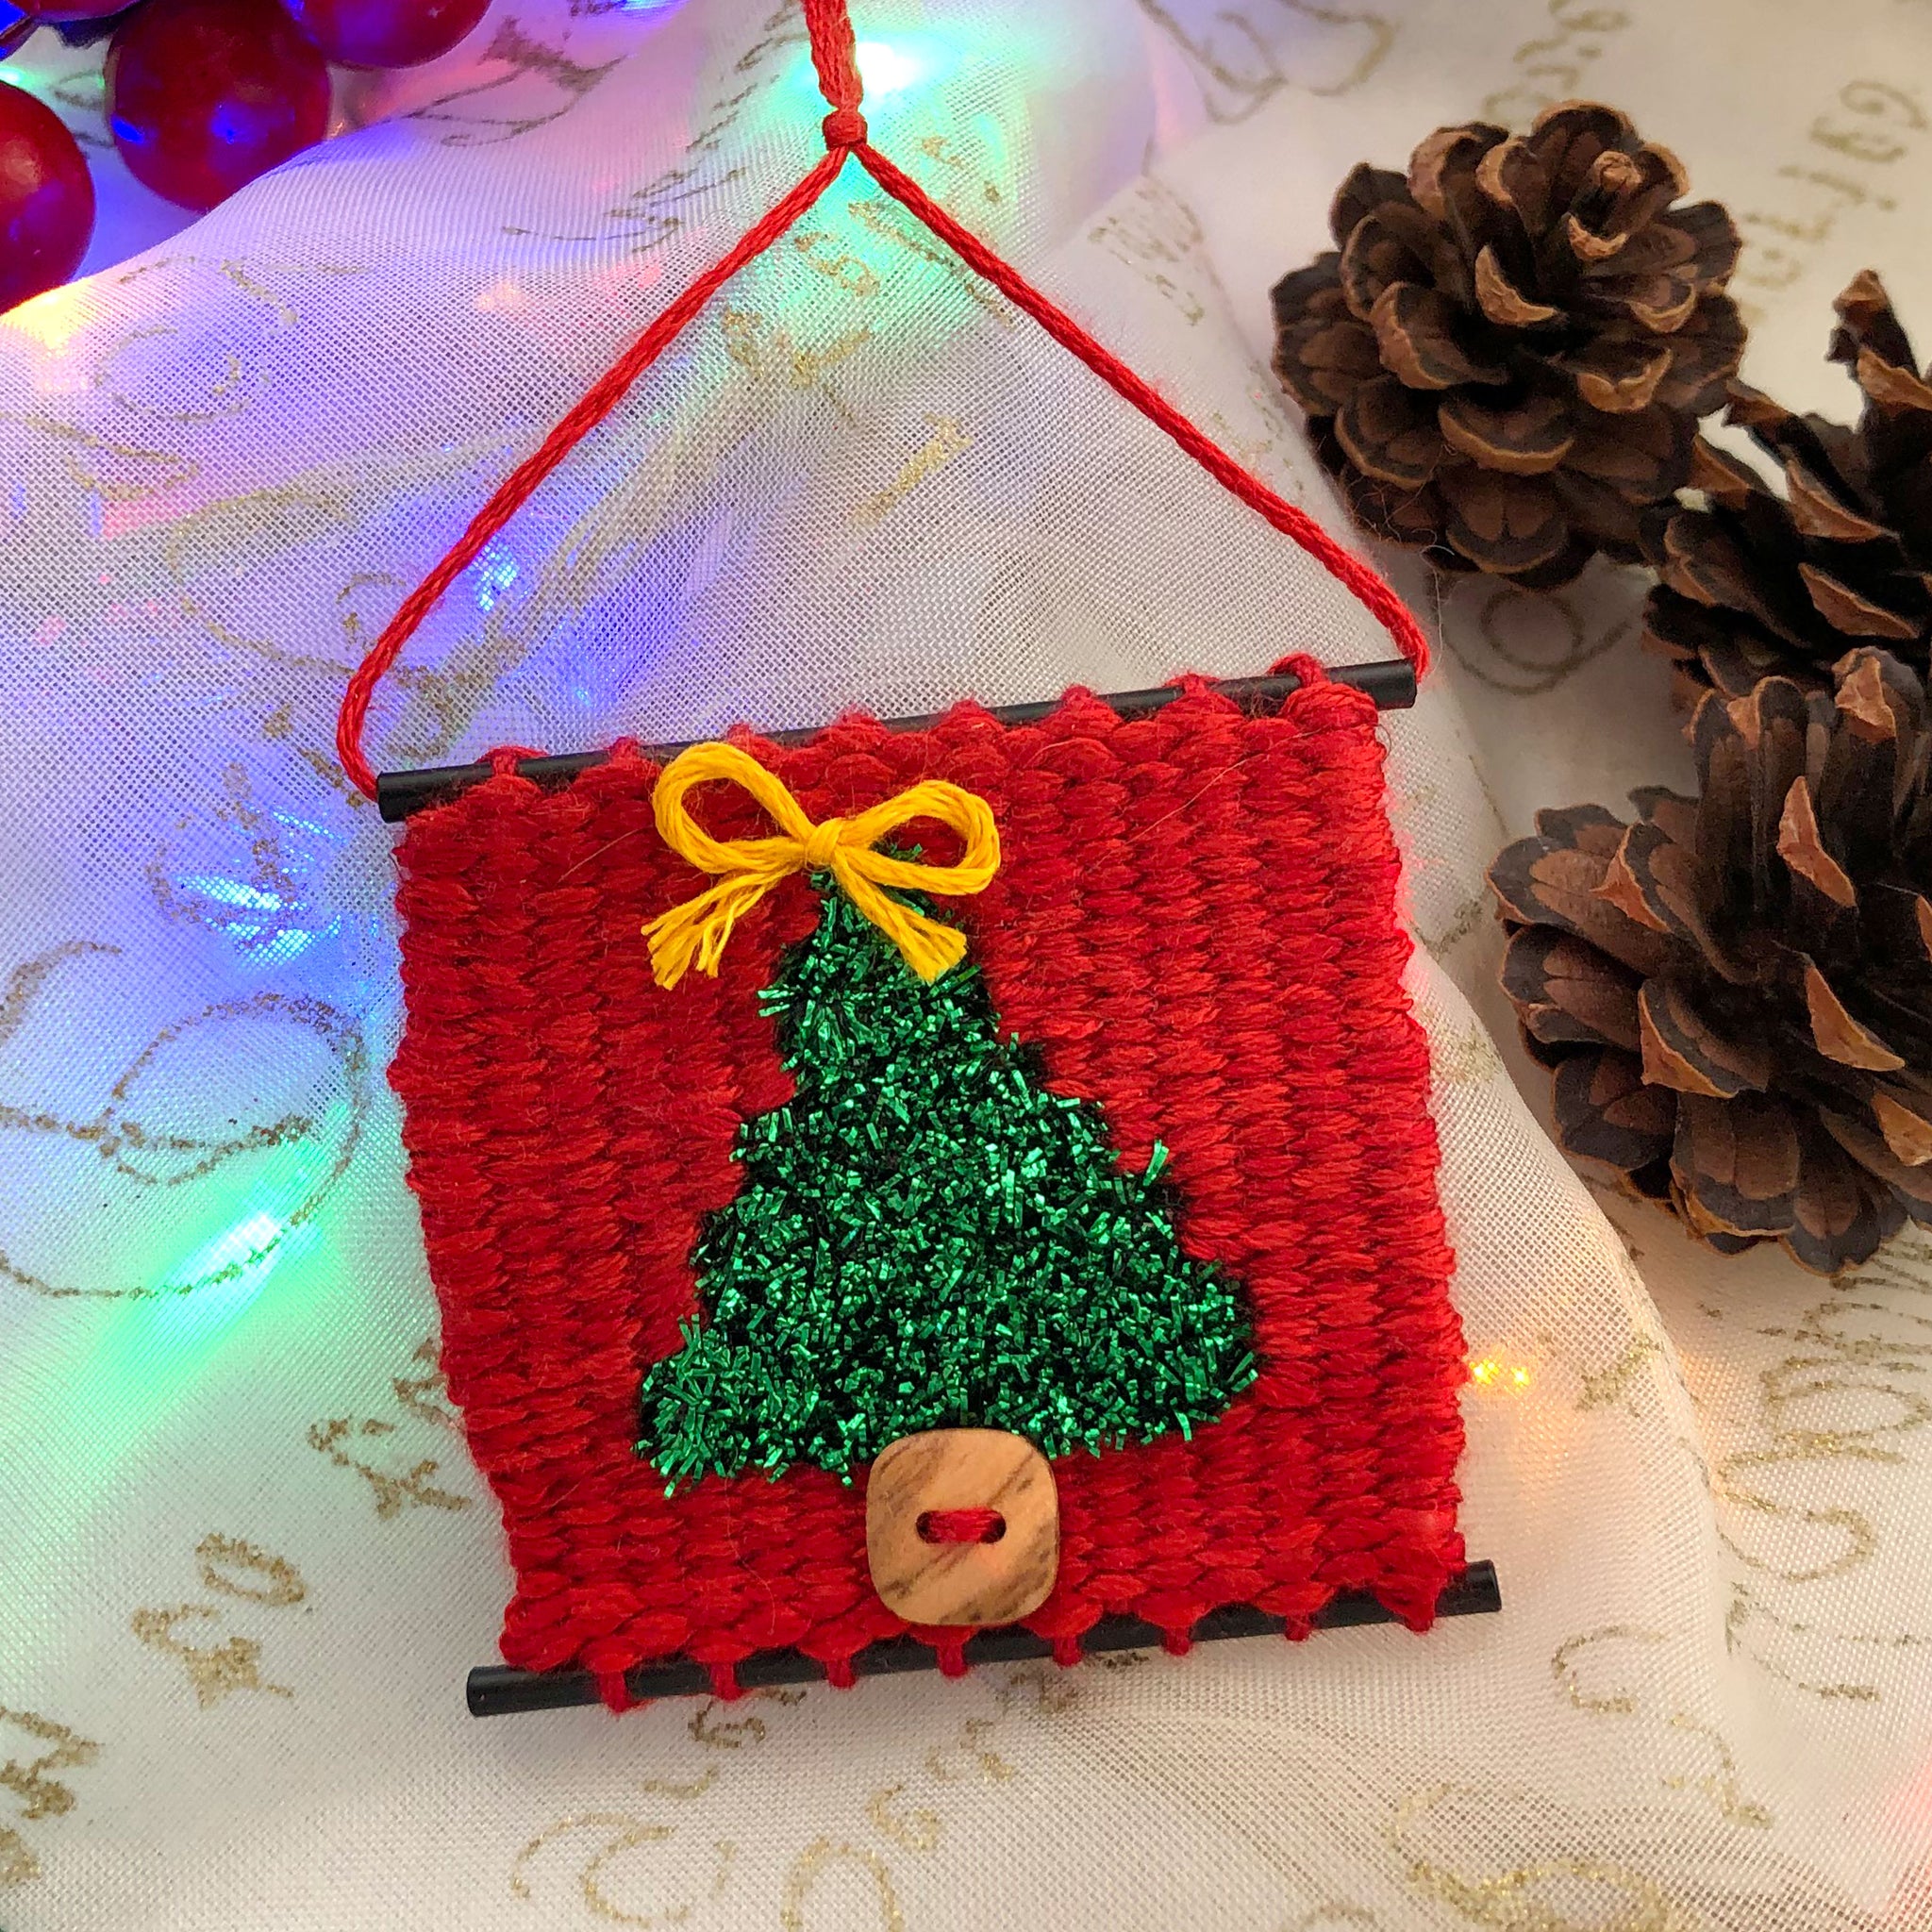 Tiny Loom Kit- Handwoven Christmas Tree Ornament Kit - The Creativity Patch  - Lucy Jennings